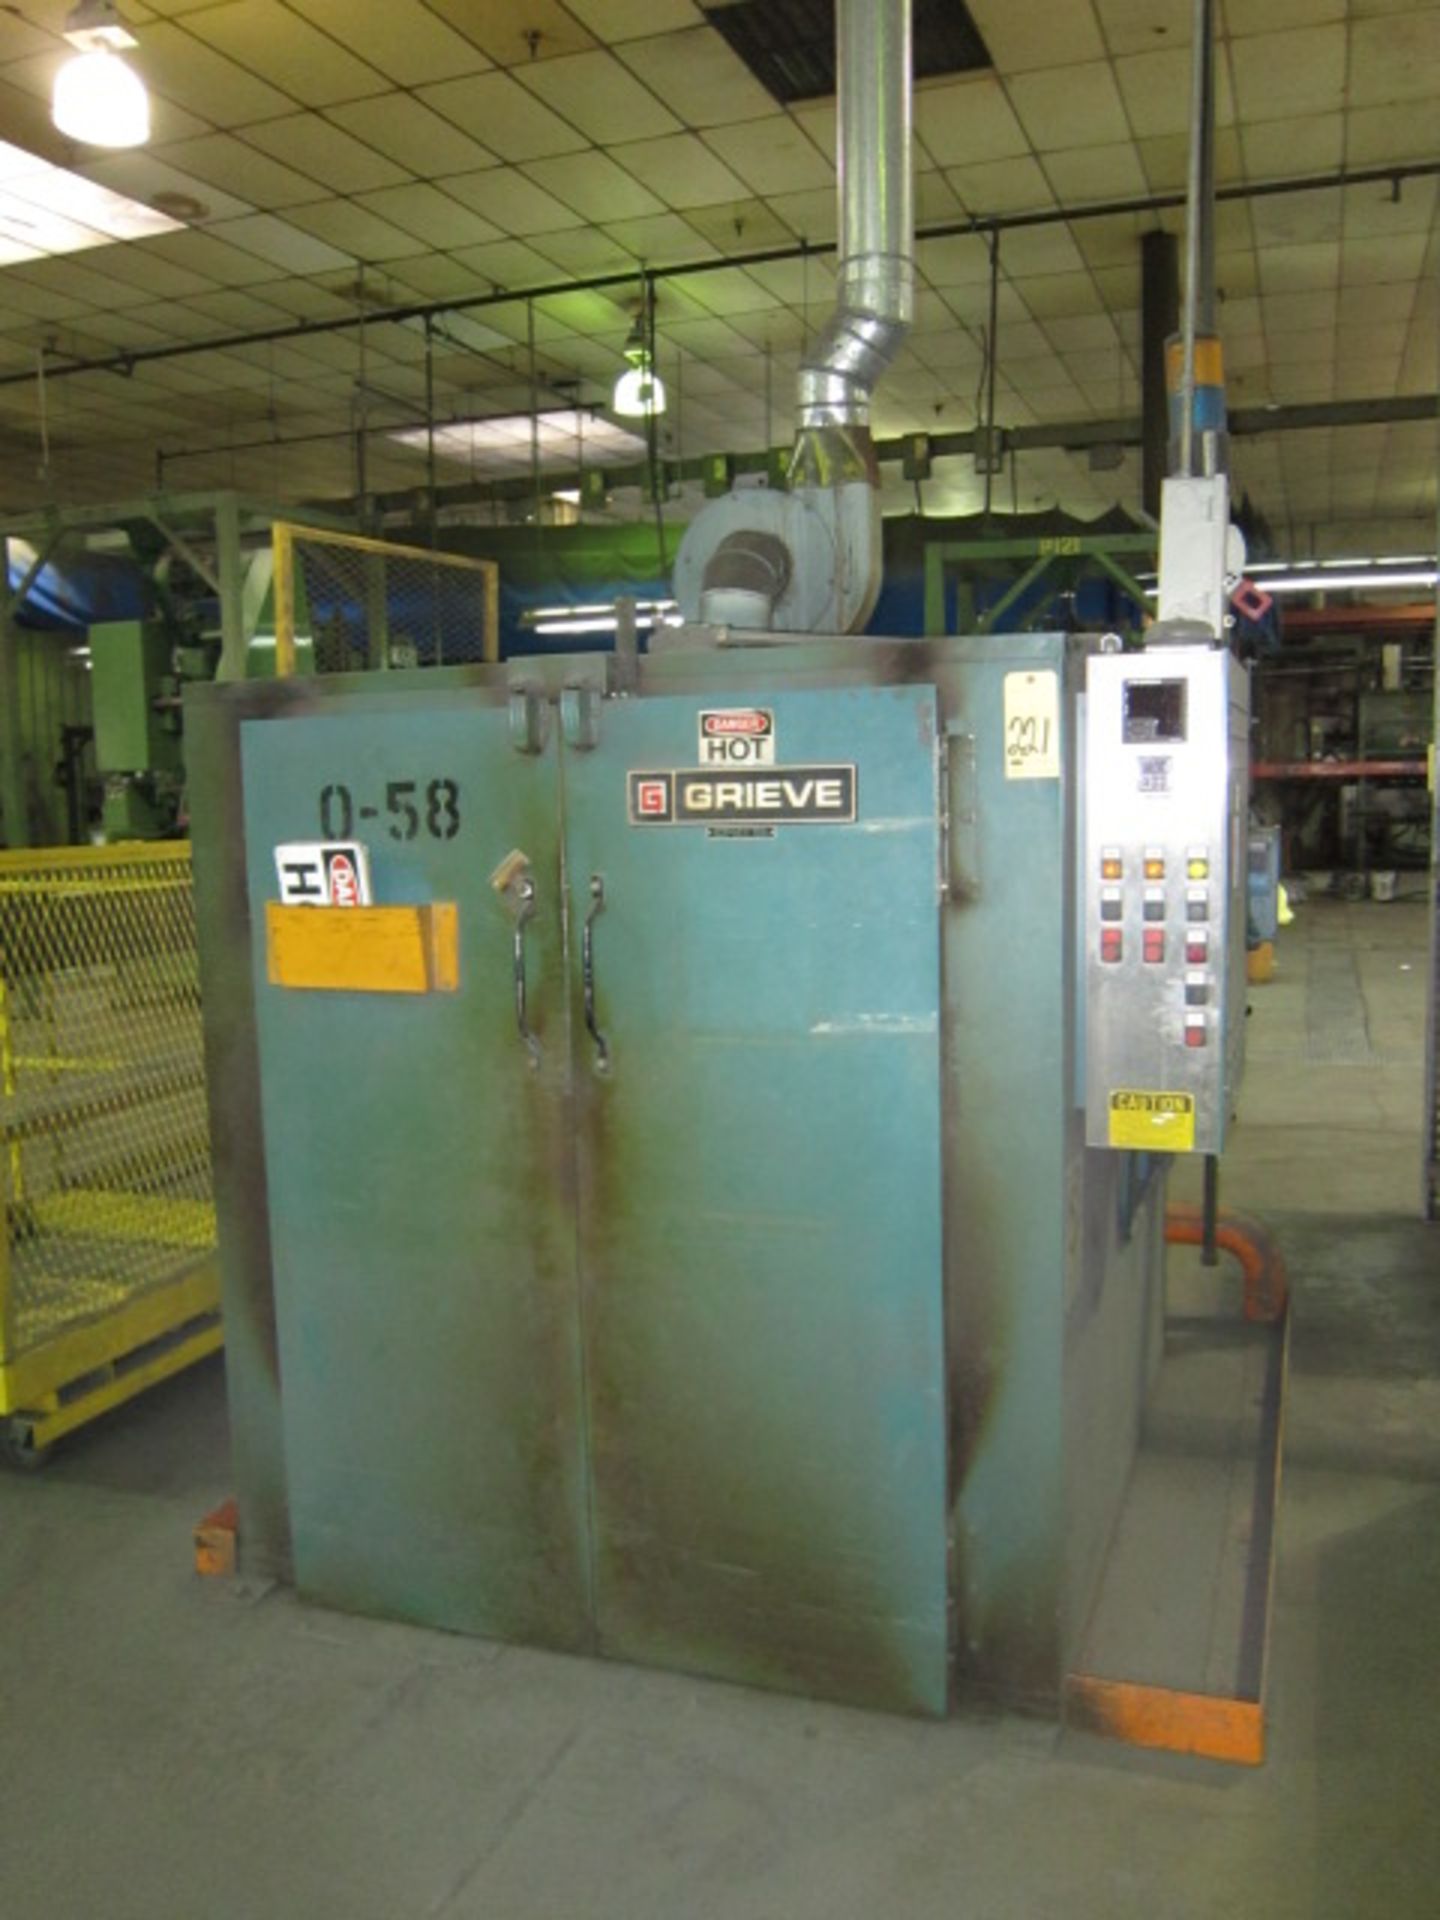 CABINET BAKE OVEN, GRIEVE MDL. TBH-500, 350 deg. F. max. temp., 2-door design, gas fired, S/N